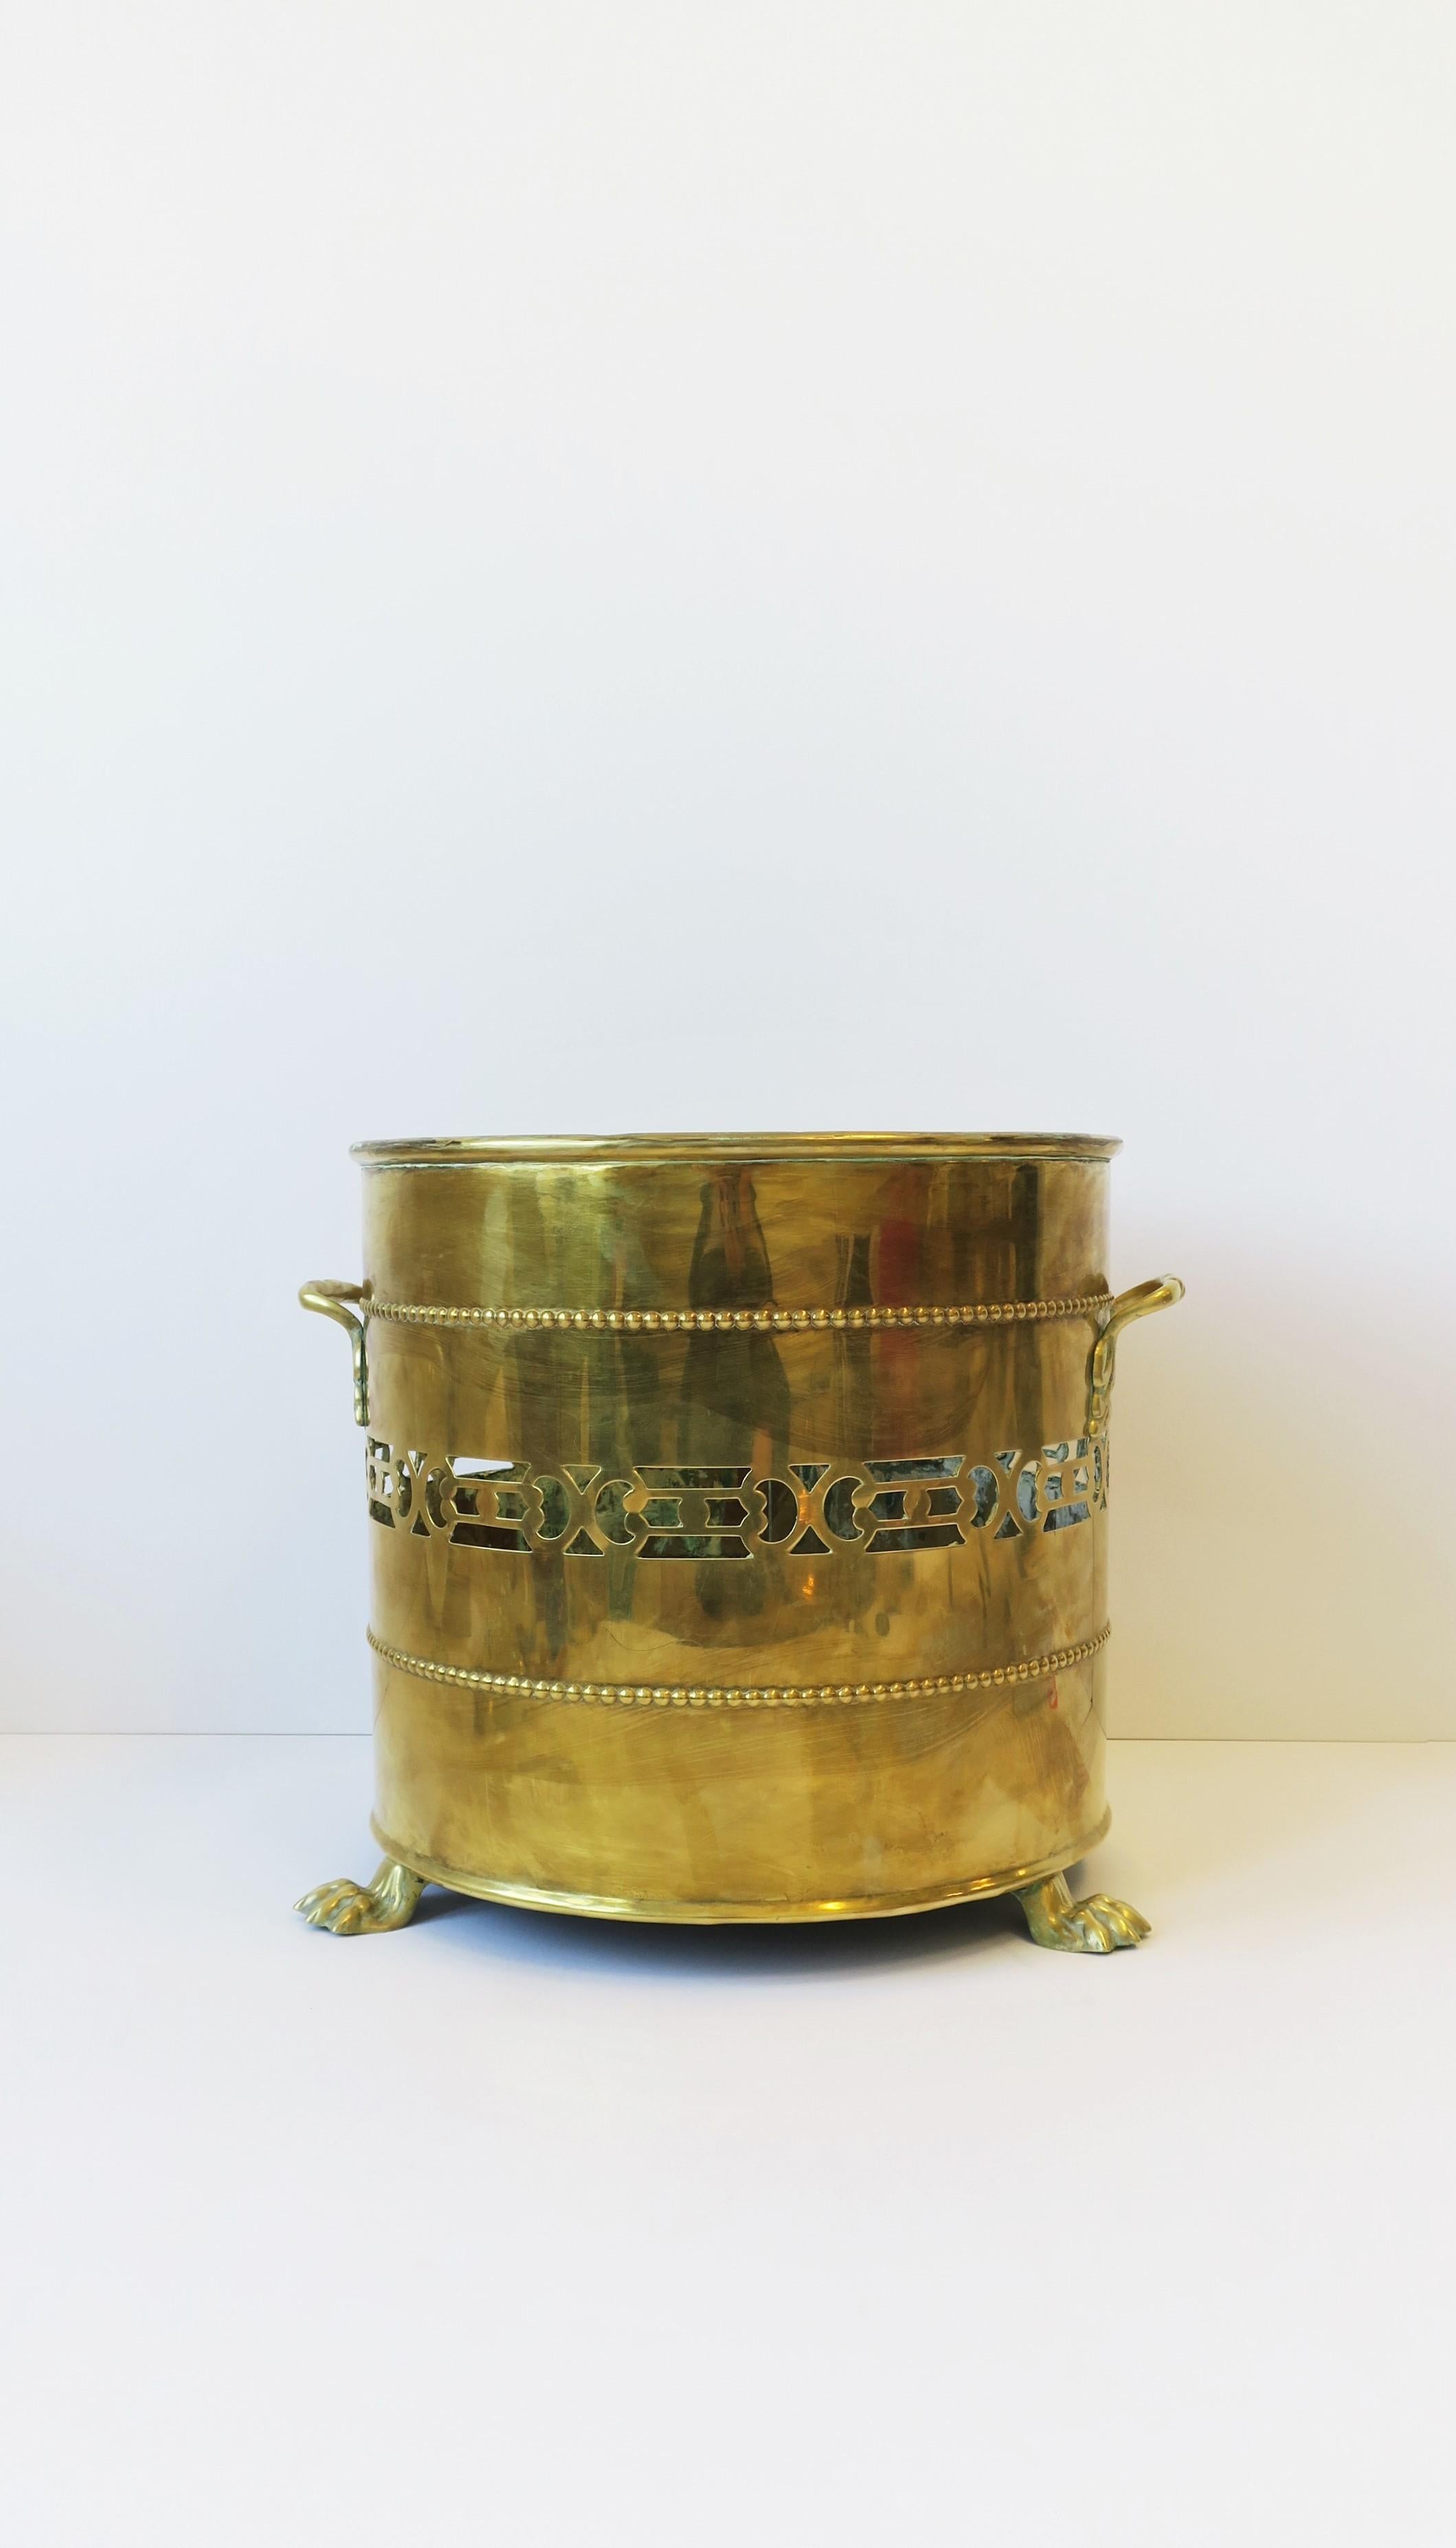 A substantial brass cachepot jardinière plant pot holder with lion design in the Regency style, circa 20th century, England. Piece is brass with a tri-lion paw feet base, handles on either side, and bead and perforated design around. Dimensions: